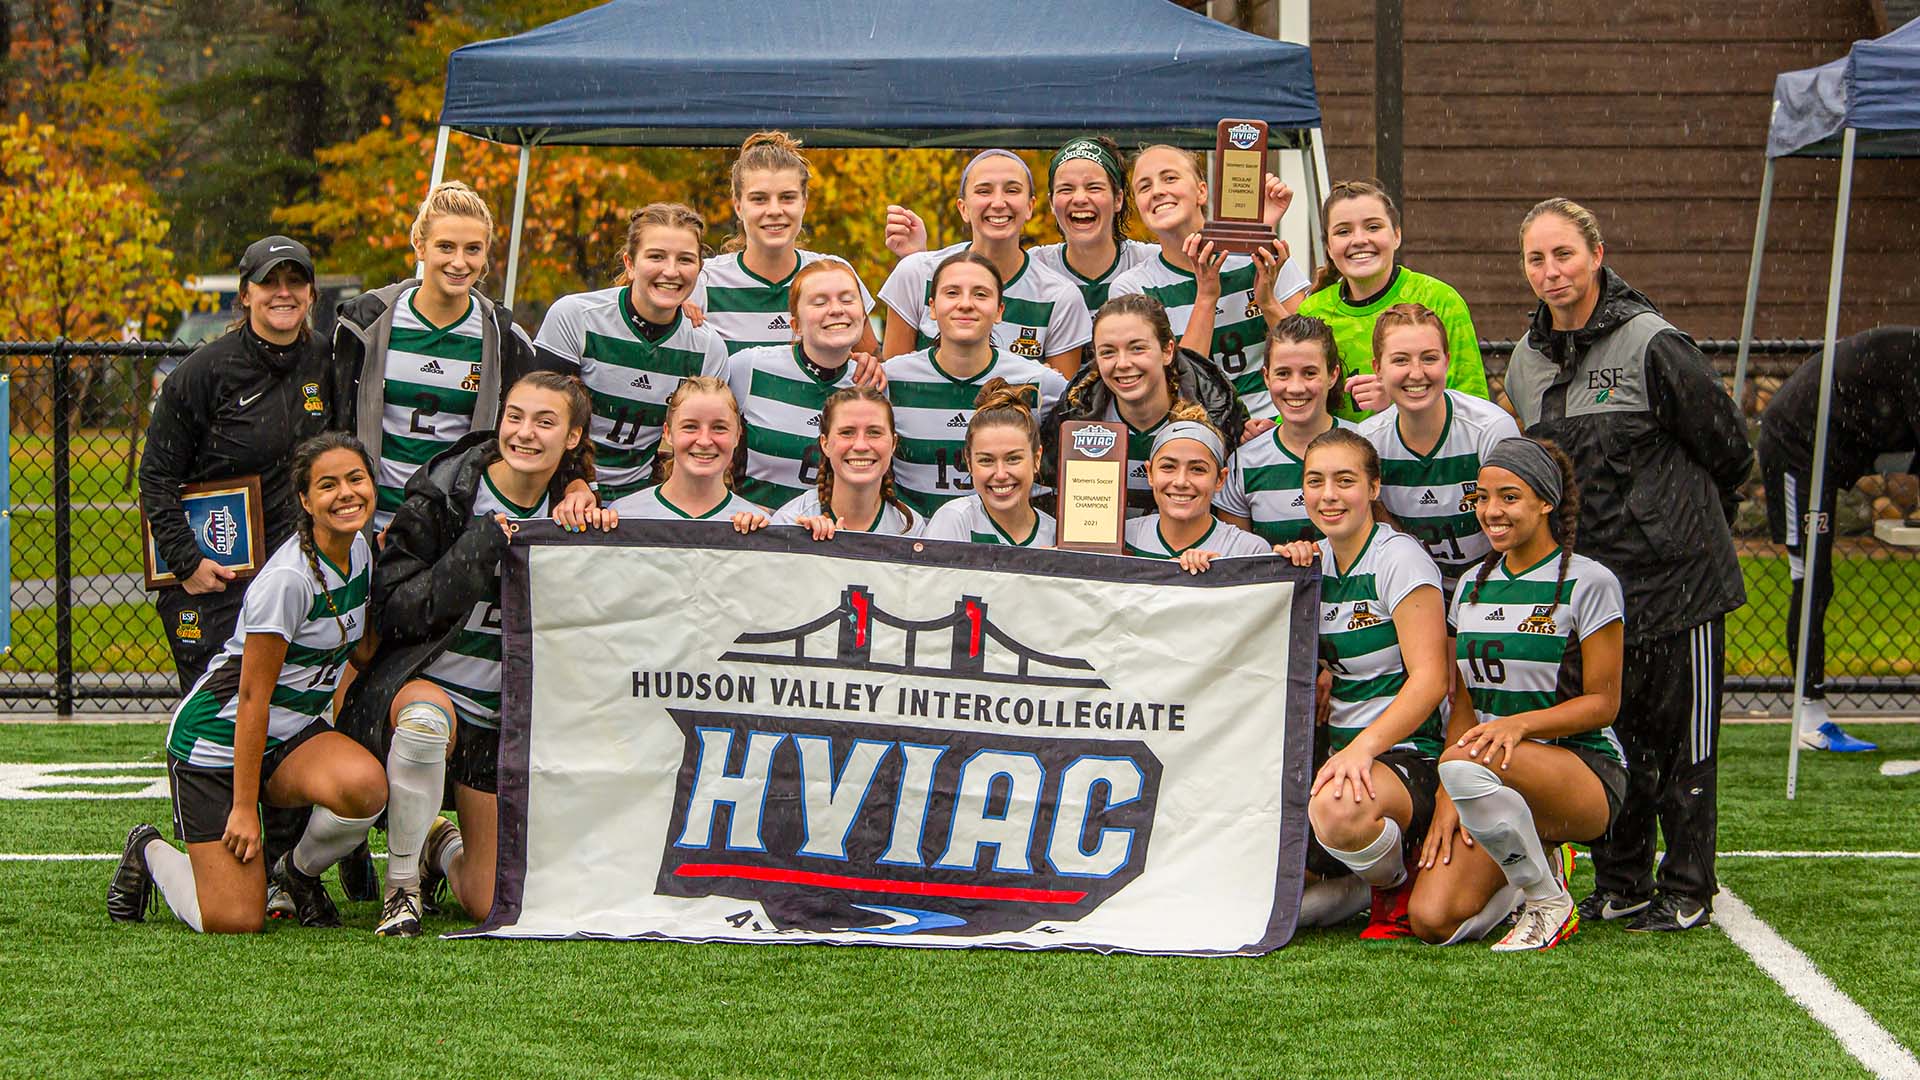 SUNY ESF Claims Fifth Straight Women's Soccer Title